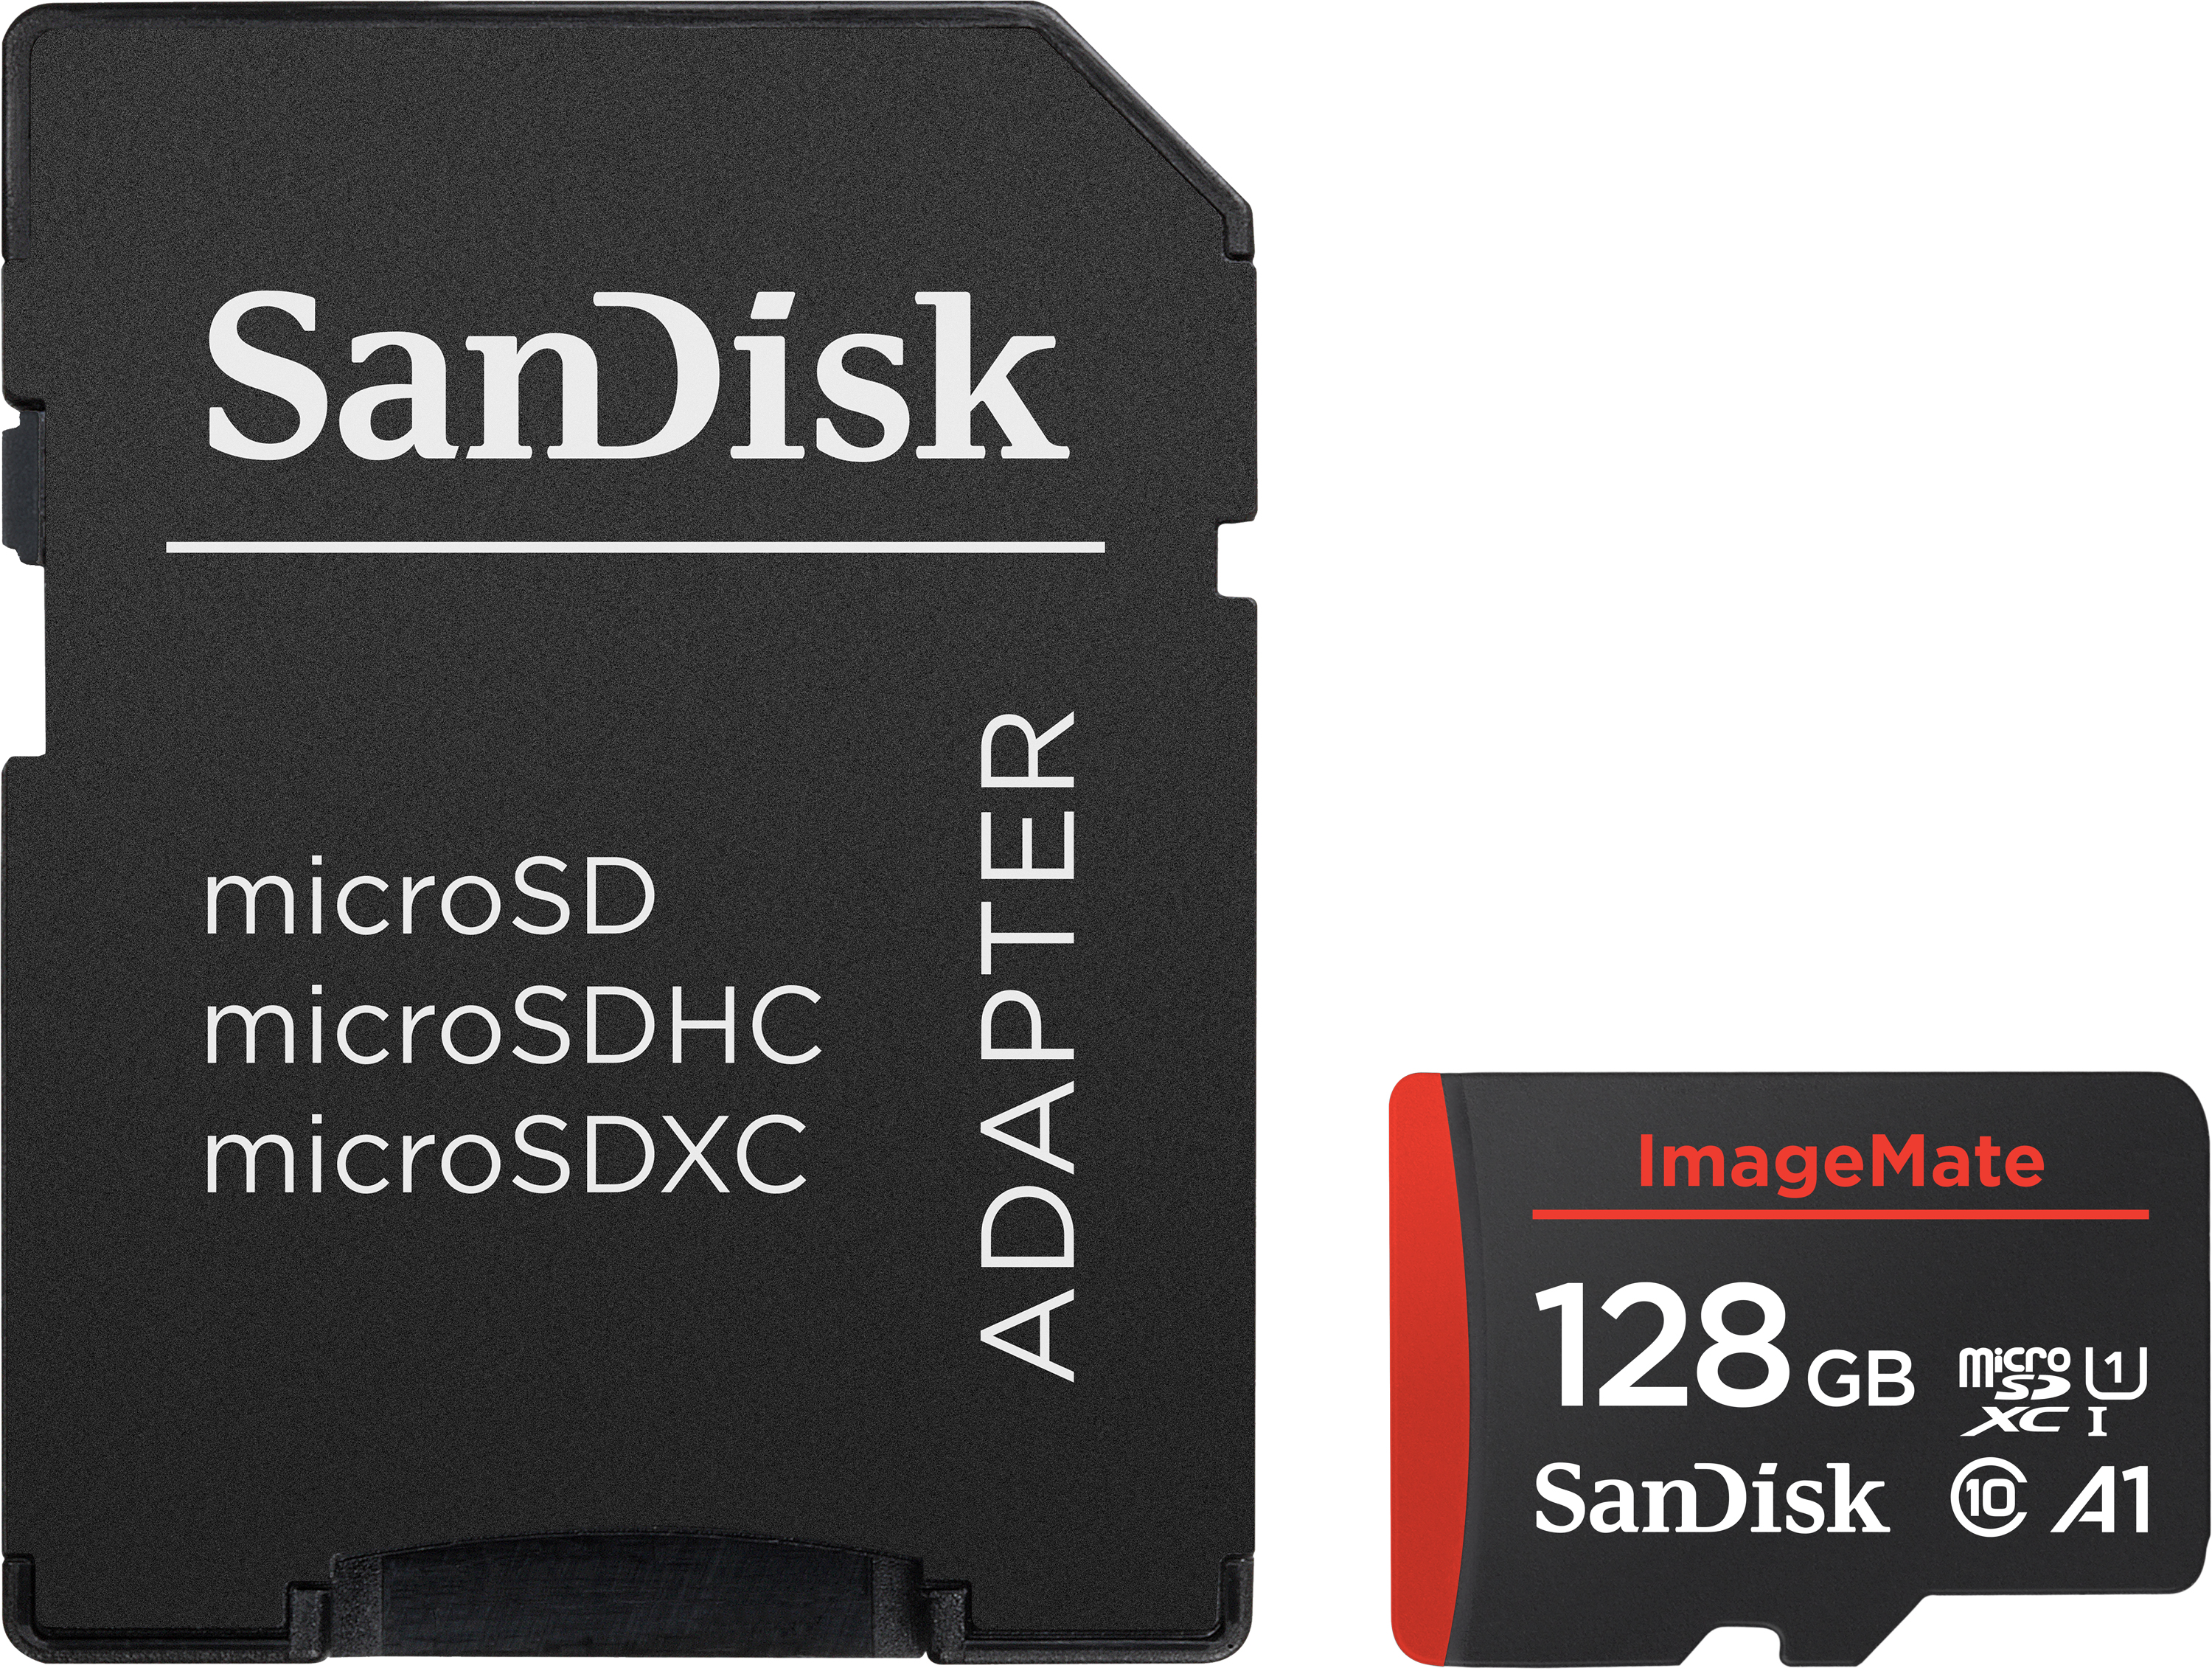 SanDisk 128 GB ImageMate microSDXC UHS-1 Memory Card with Adapter - C10, U1, Full HD, A1 Micro SD Card - image 4 of 5